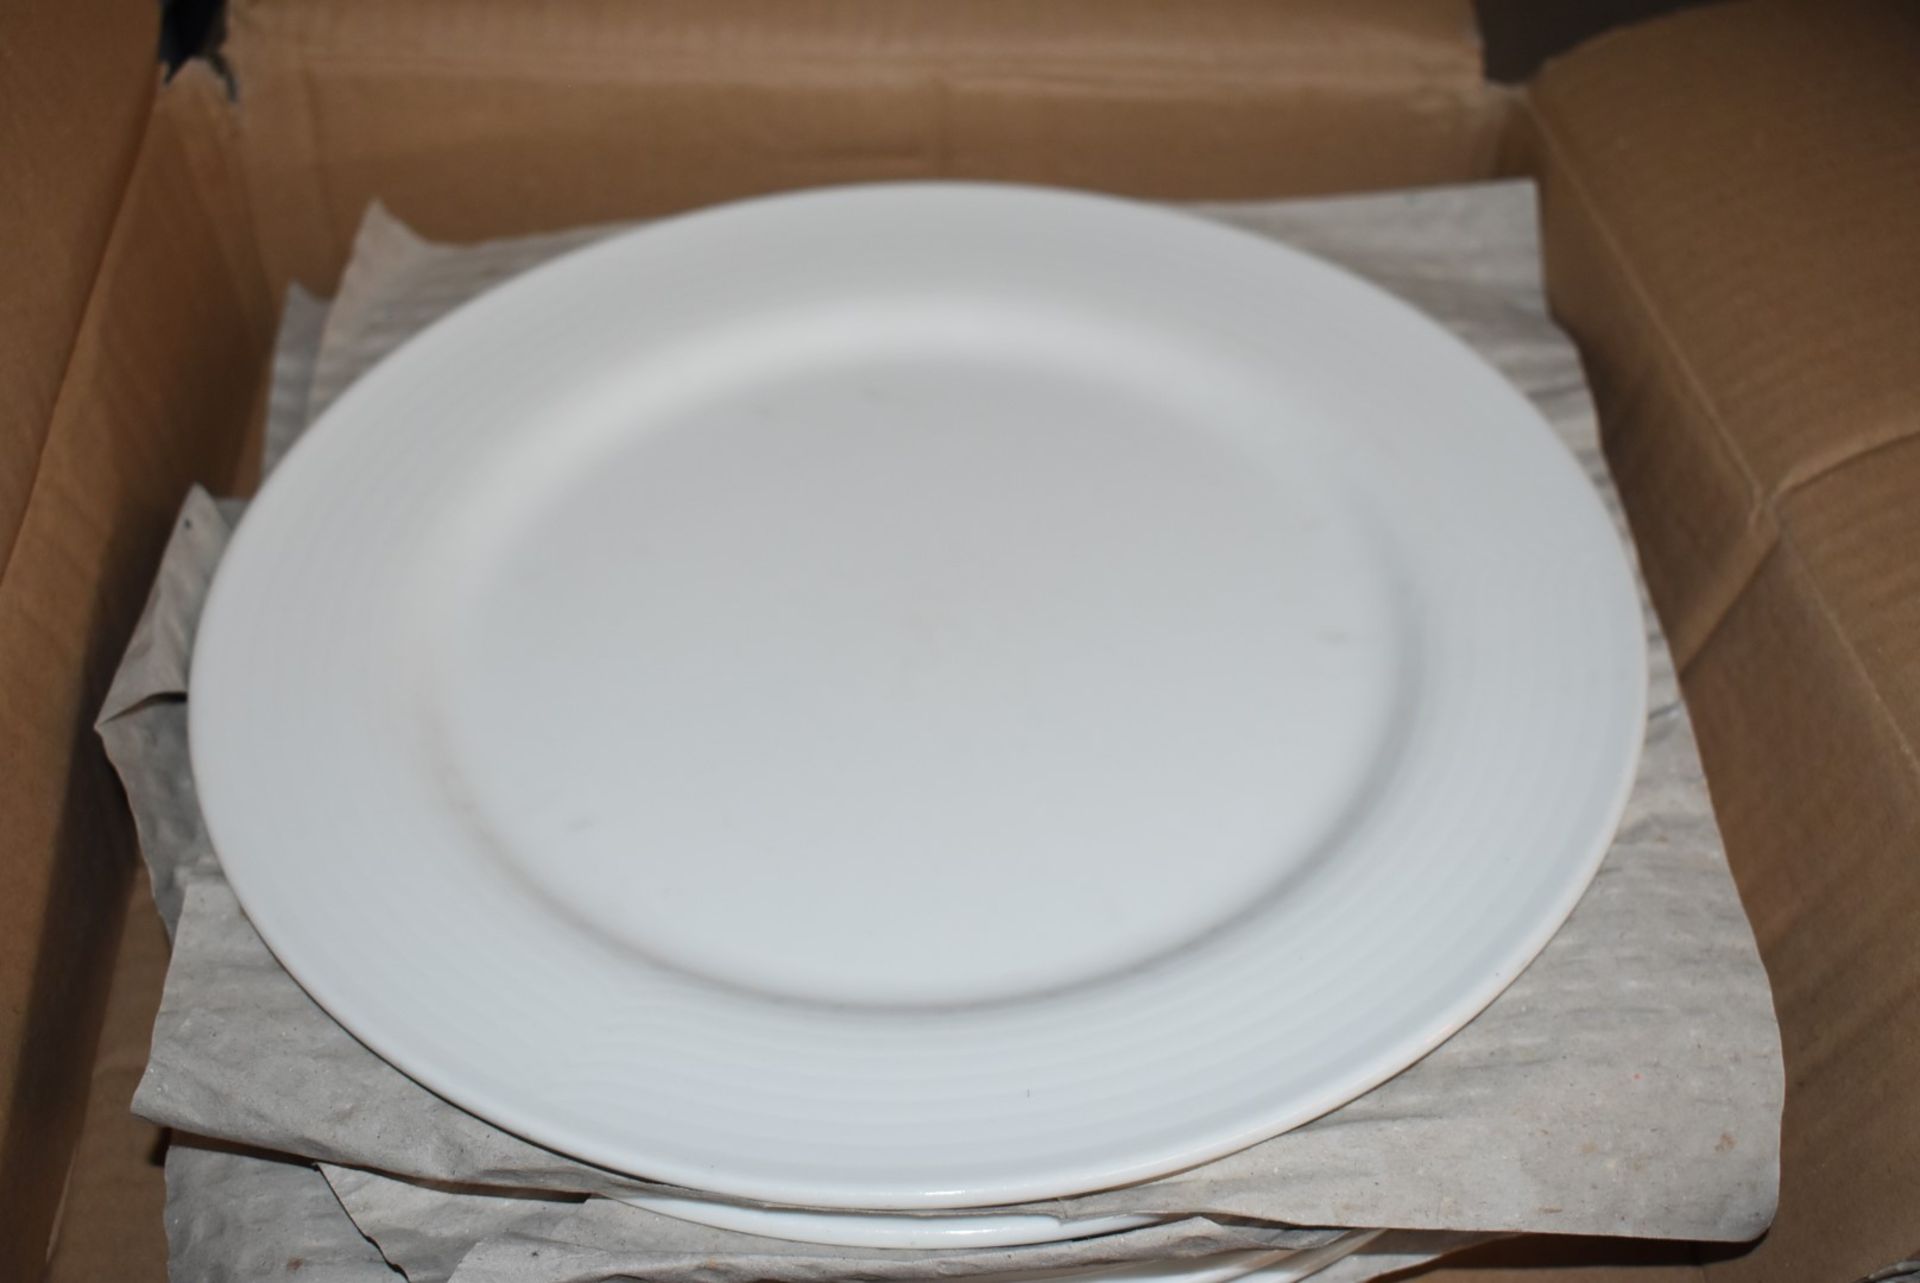 6 x Villeroy & Boch Affinity Contemporary Porcelain Flat Dinner Plates - 27 cms - New Boxed - Image 2 of 5